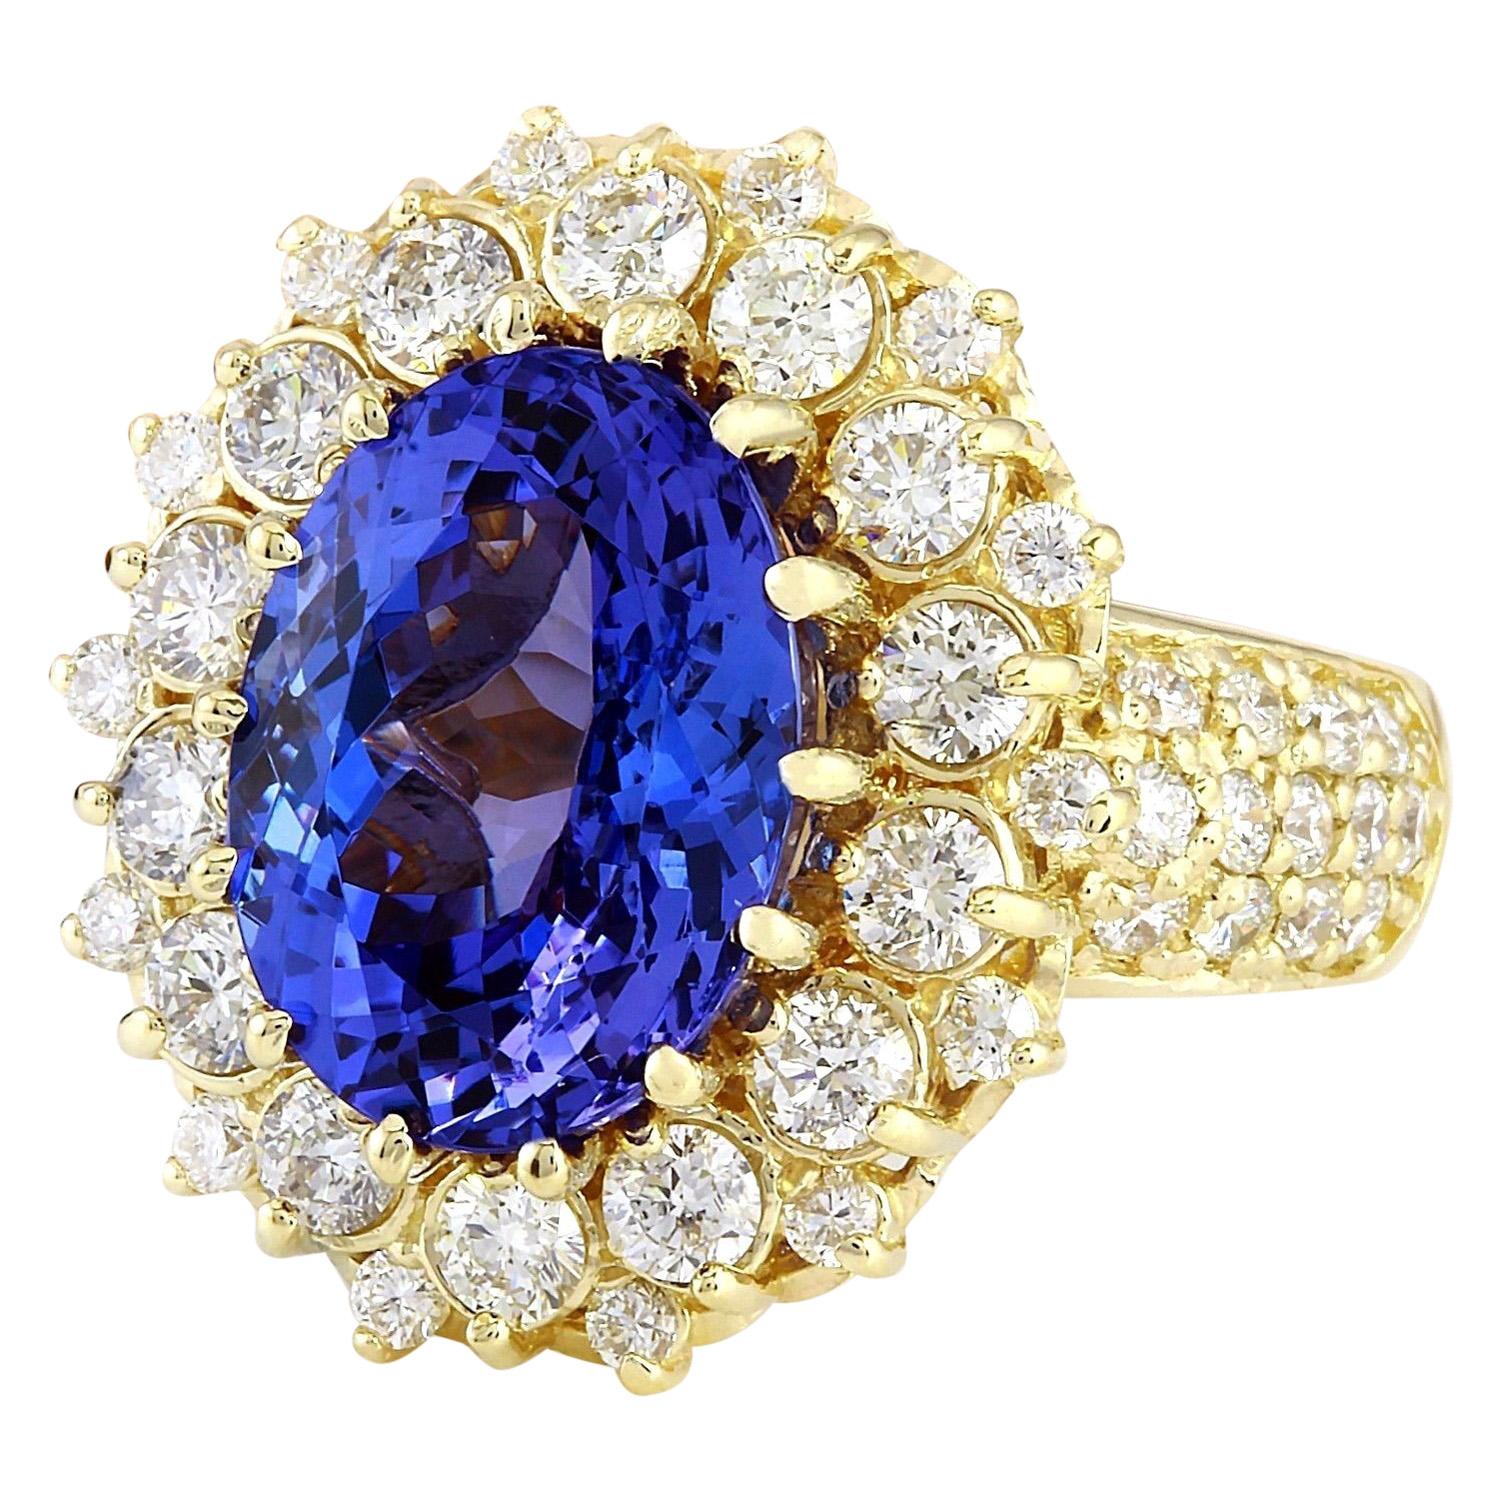 Introducing our opulent 14K Solid Yellow Gold Diamond Ring featuring a magnificent 7.77 Carat Tanzanite at its center. Crafted with precision and elegance, this ring exudes sophistication and luxury. The dazzling Tanzanite weighs 5.97 Carats and